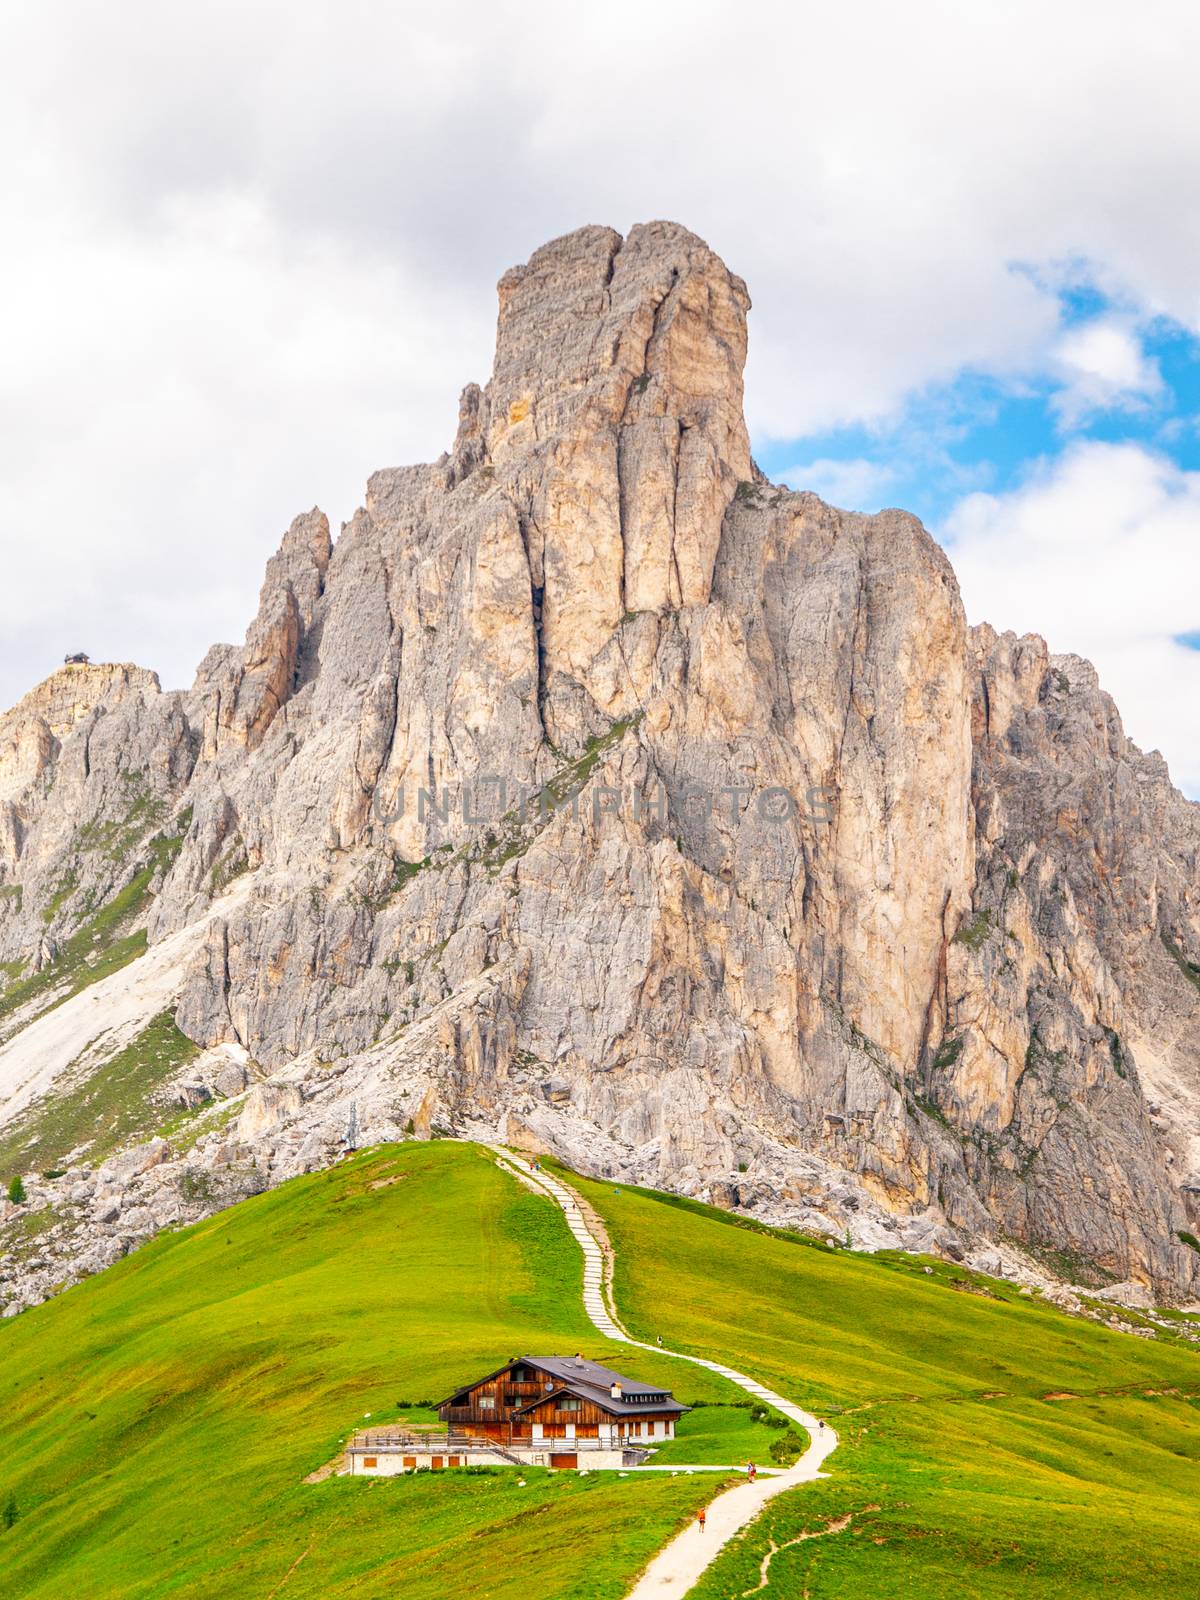 Passo Giau with Mount Gusela on the background, Dolomites, or Dolomiti Mountains, Italy by pyty